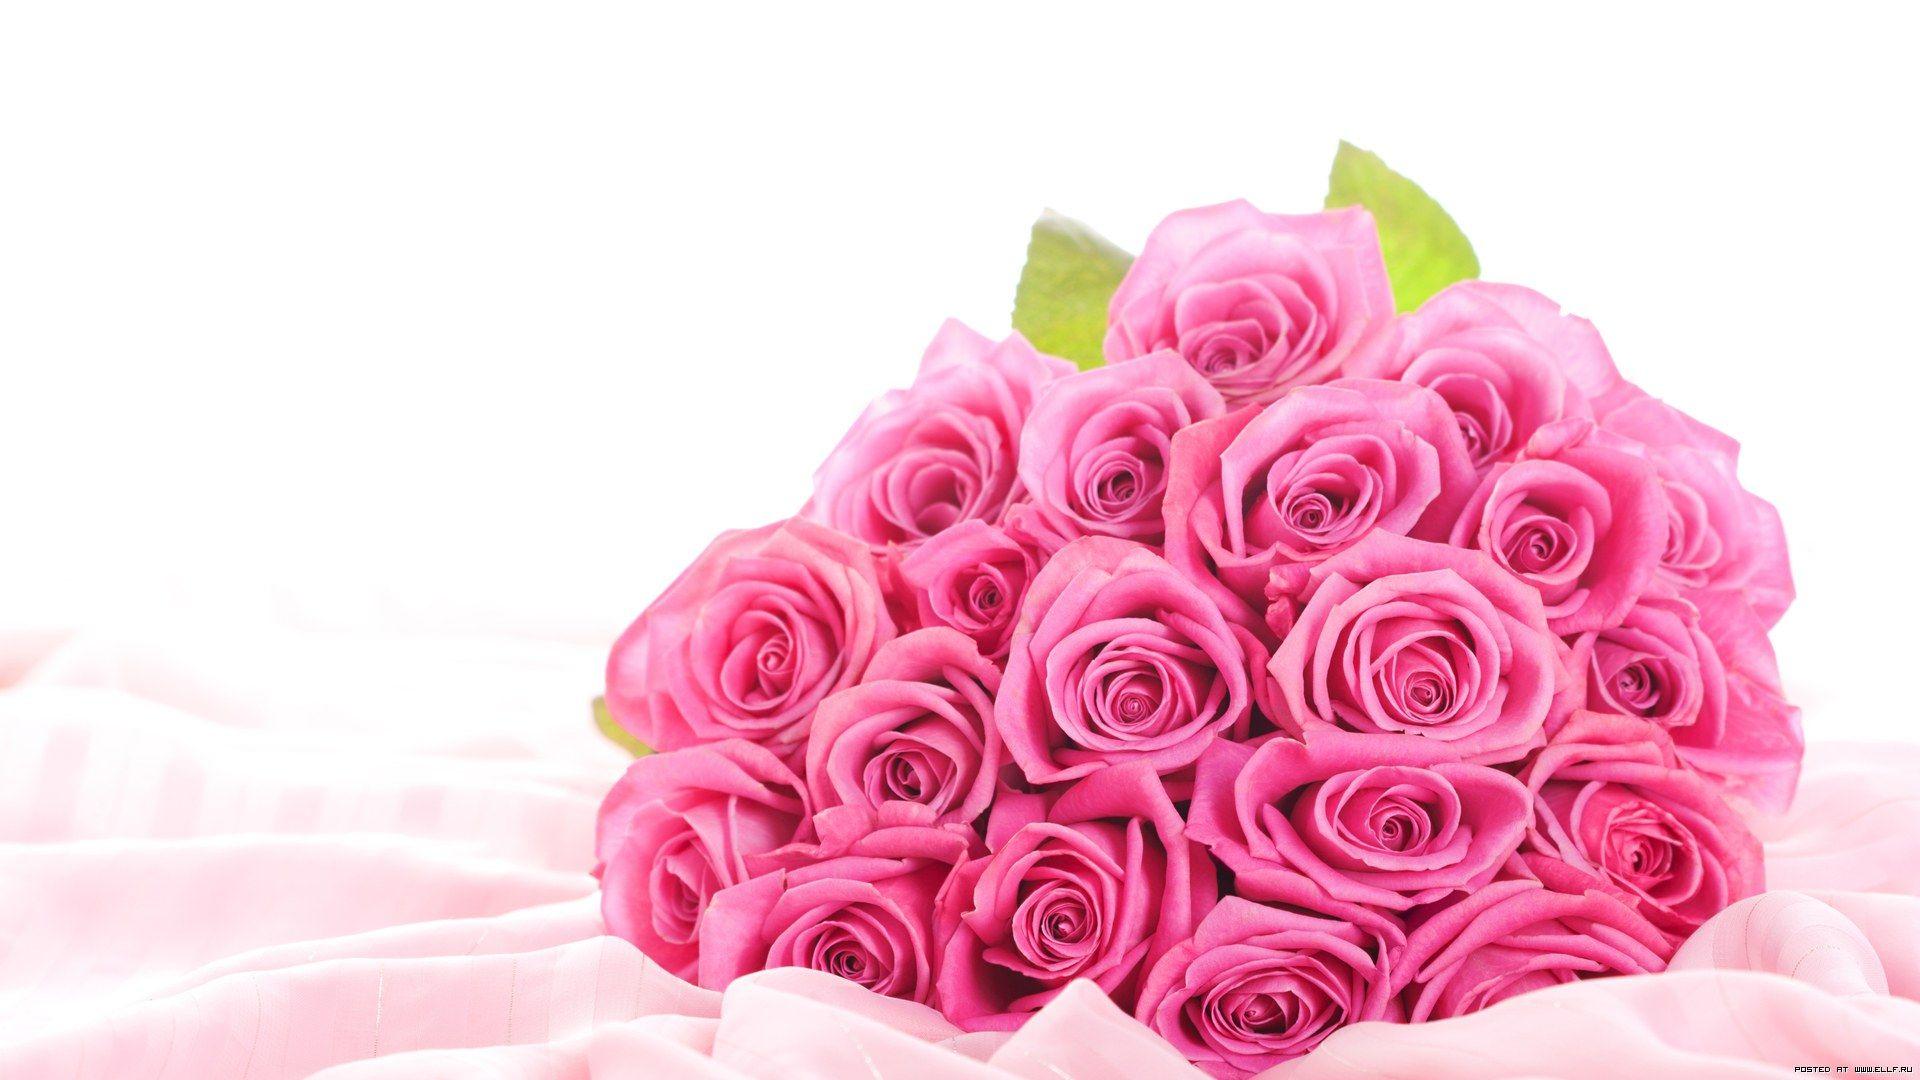 Wallpapers Flowers Roses - Wallpaper Cave